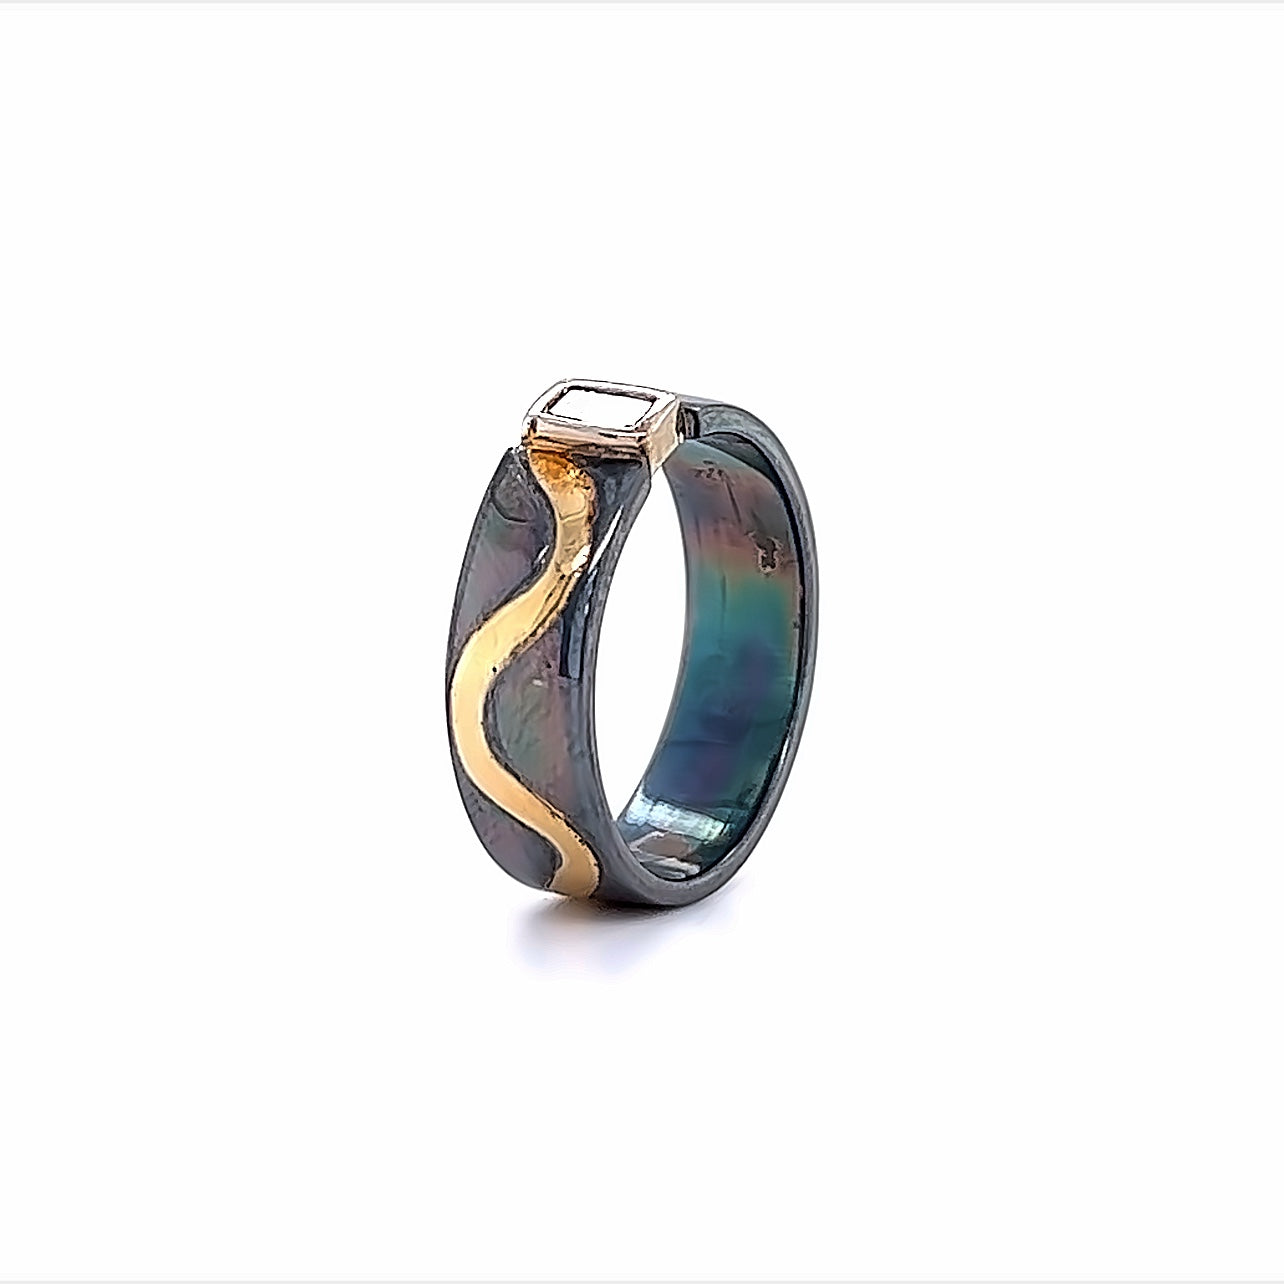 Oxidized Sterling Silver and 18k Yellow Gold Emerald Cut Diamond Pathways Ring by Paul Richter